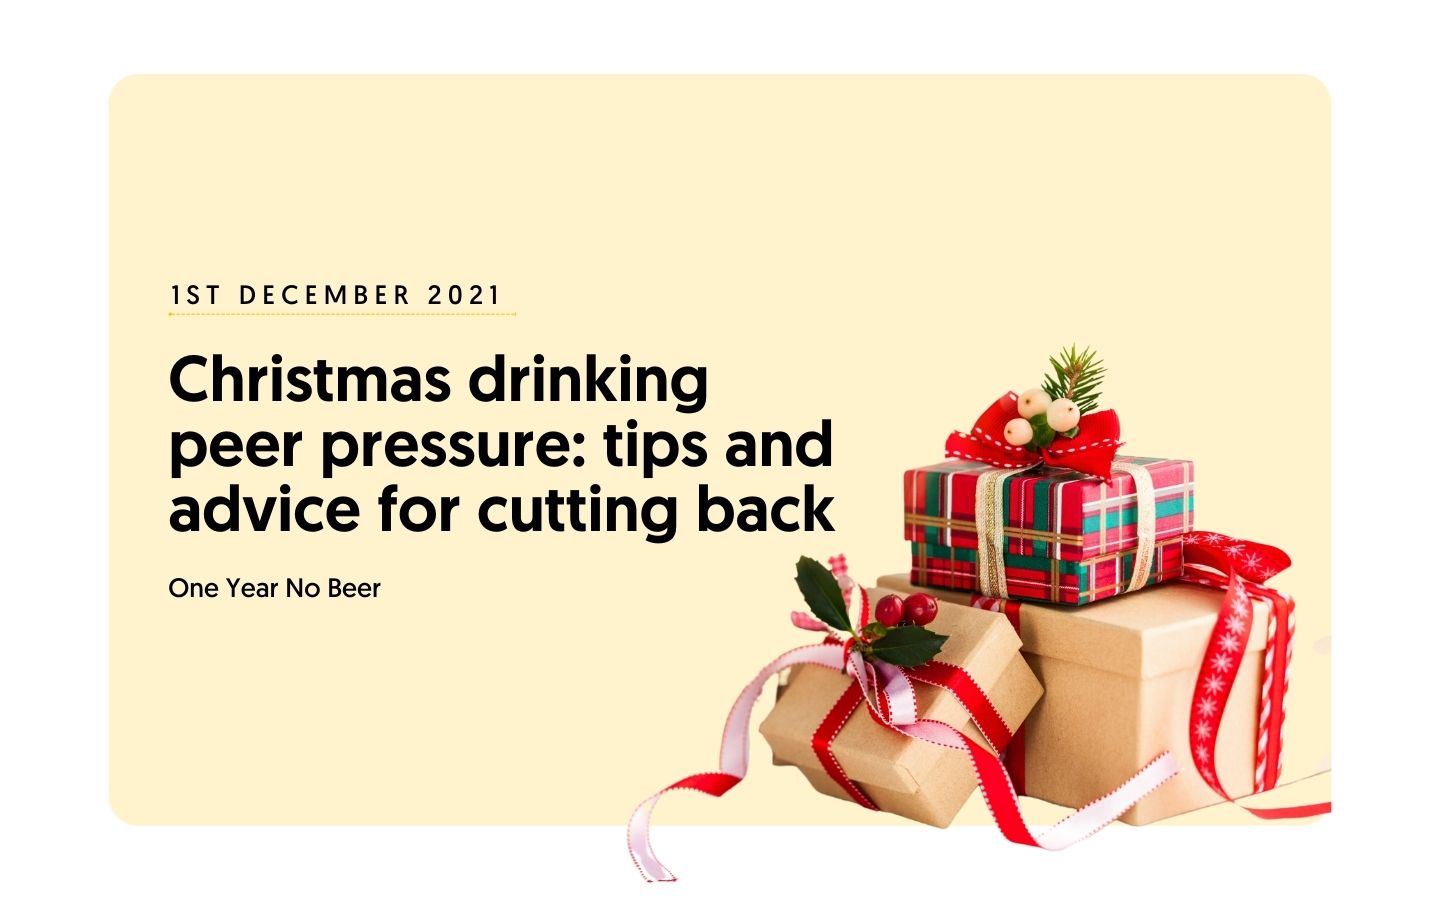 Christmas drinking peer pressure: tips and advice for cutting back